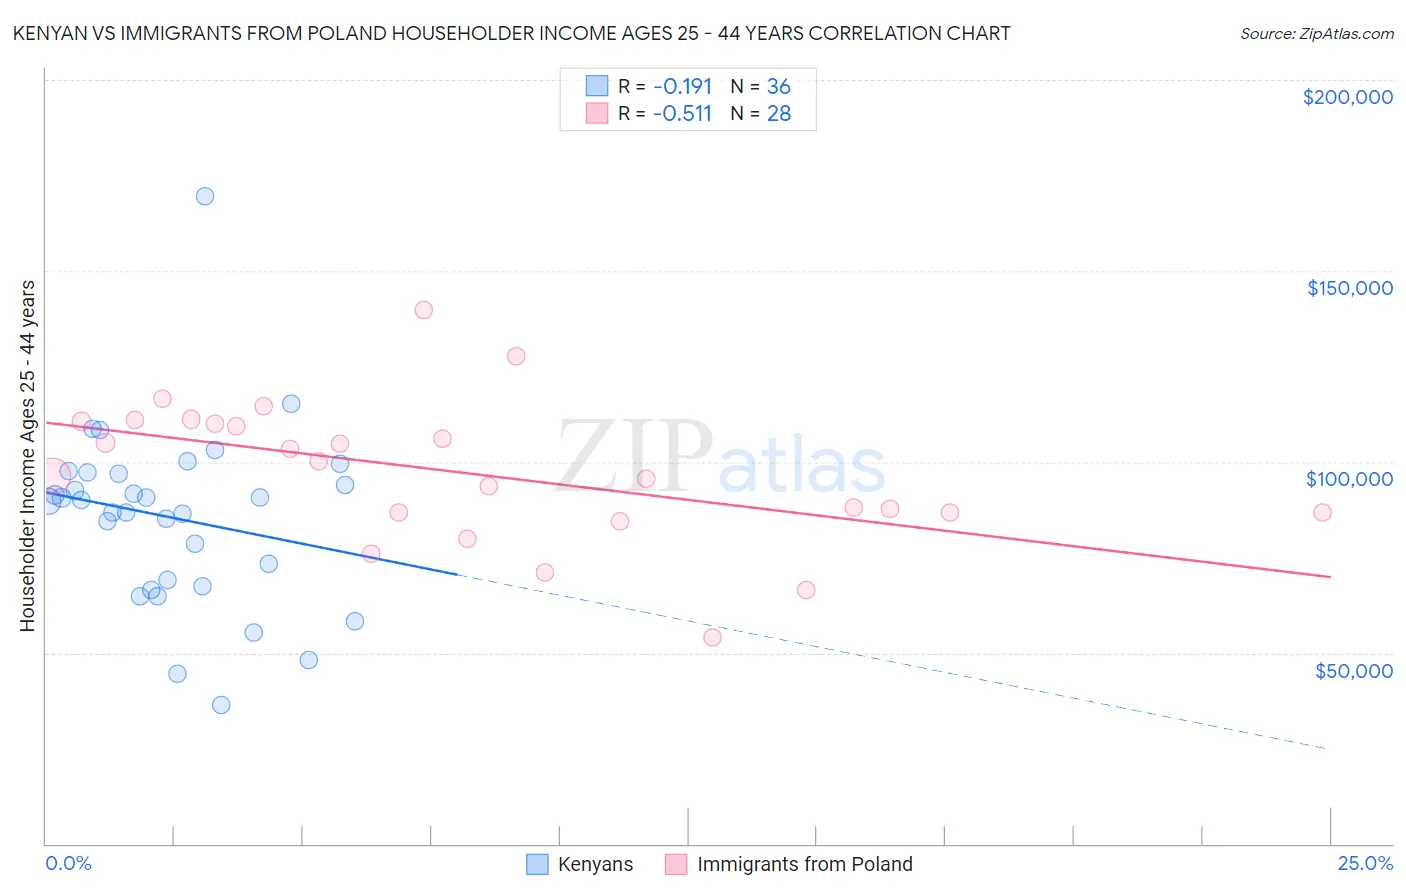 Kenyan vs Immigrants from Poland Householder Income Ages 25 - 44 years